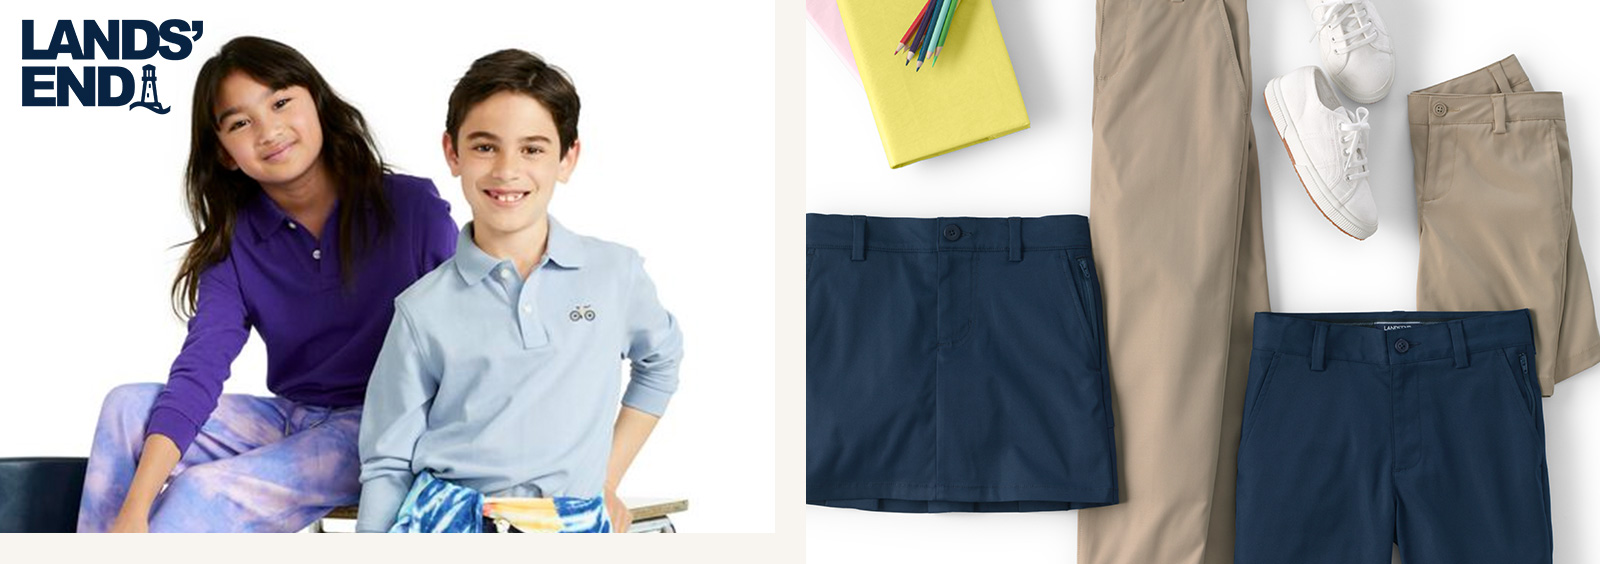 Guide to Back-to-School Clothes Shopping